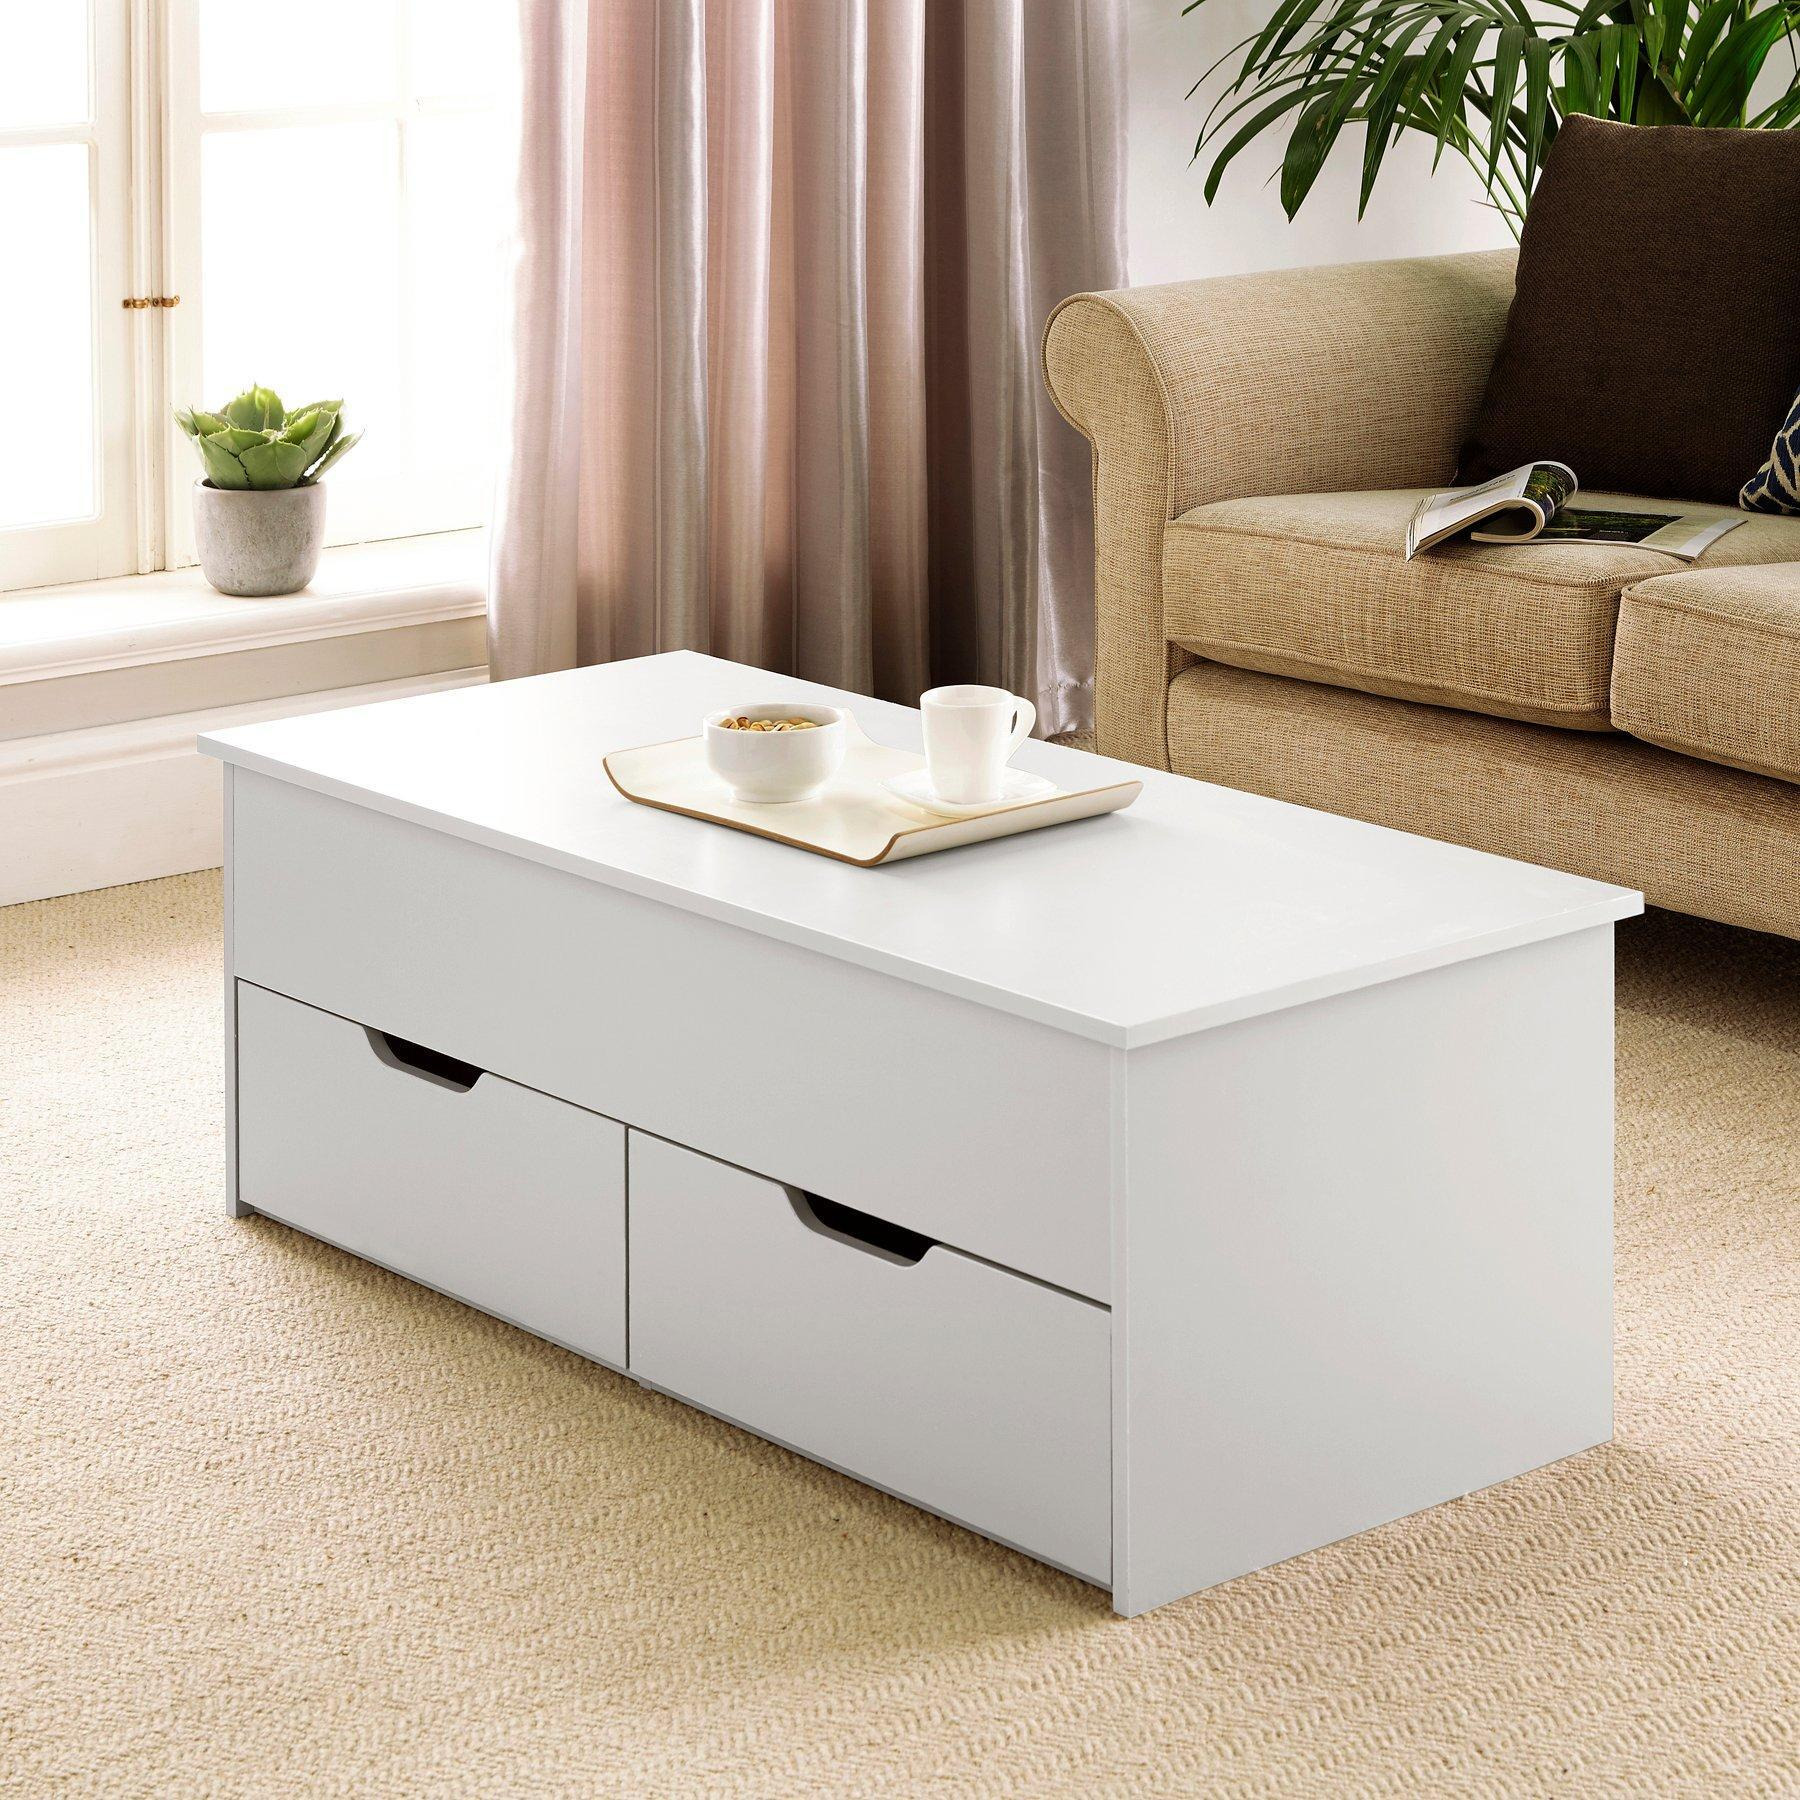 Bruges 2 Drawer Lift Up Coffee Table - image 1